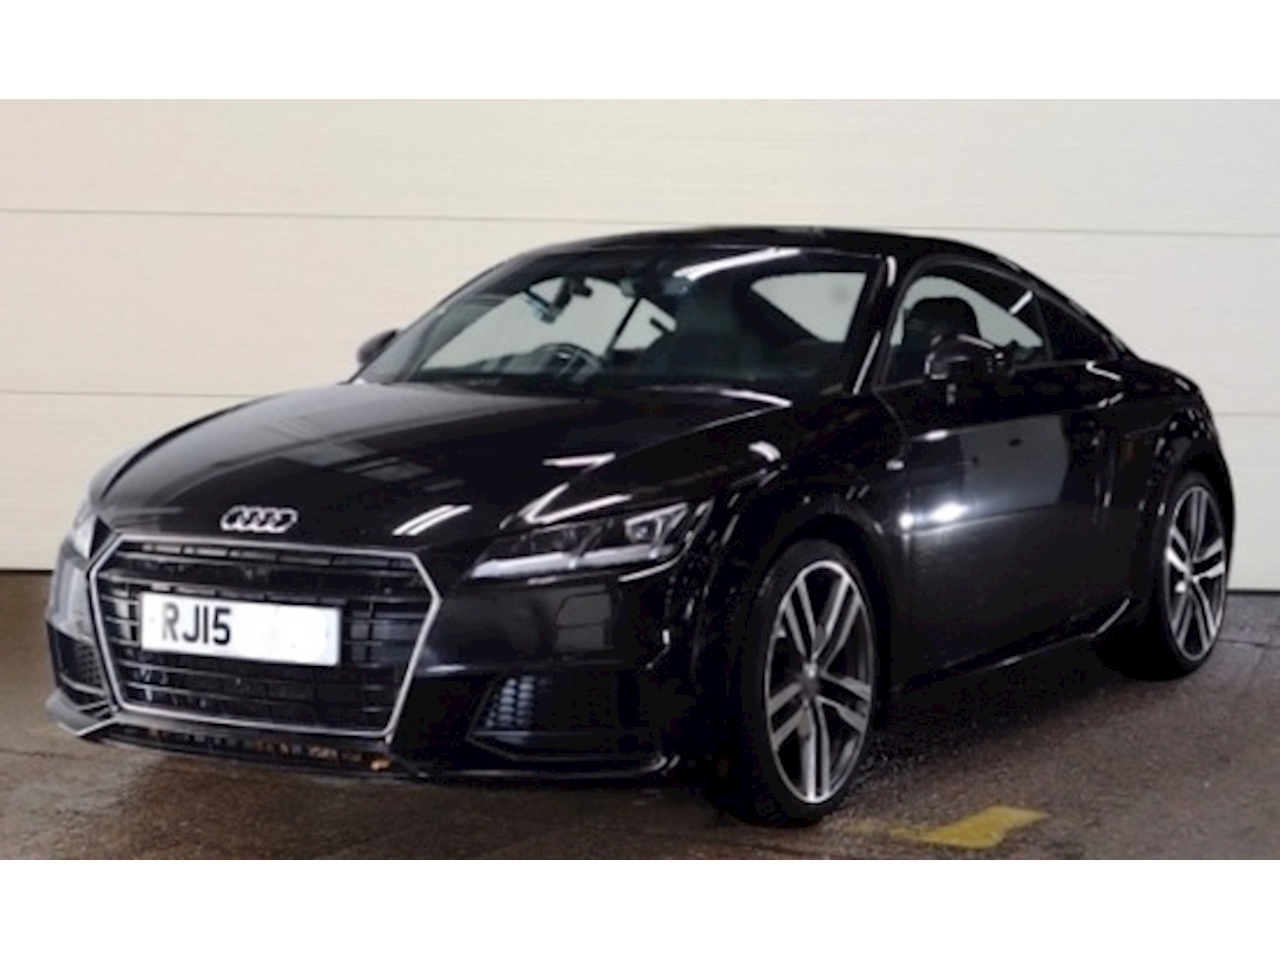 Used 15 Audi 2 0 Tdi Ultra 184 S Line Coupe 3dr Diesel S S For Sale In Derbyshire Select Motor Group